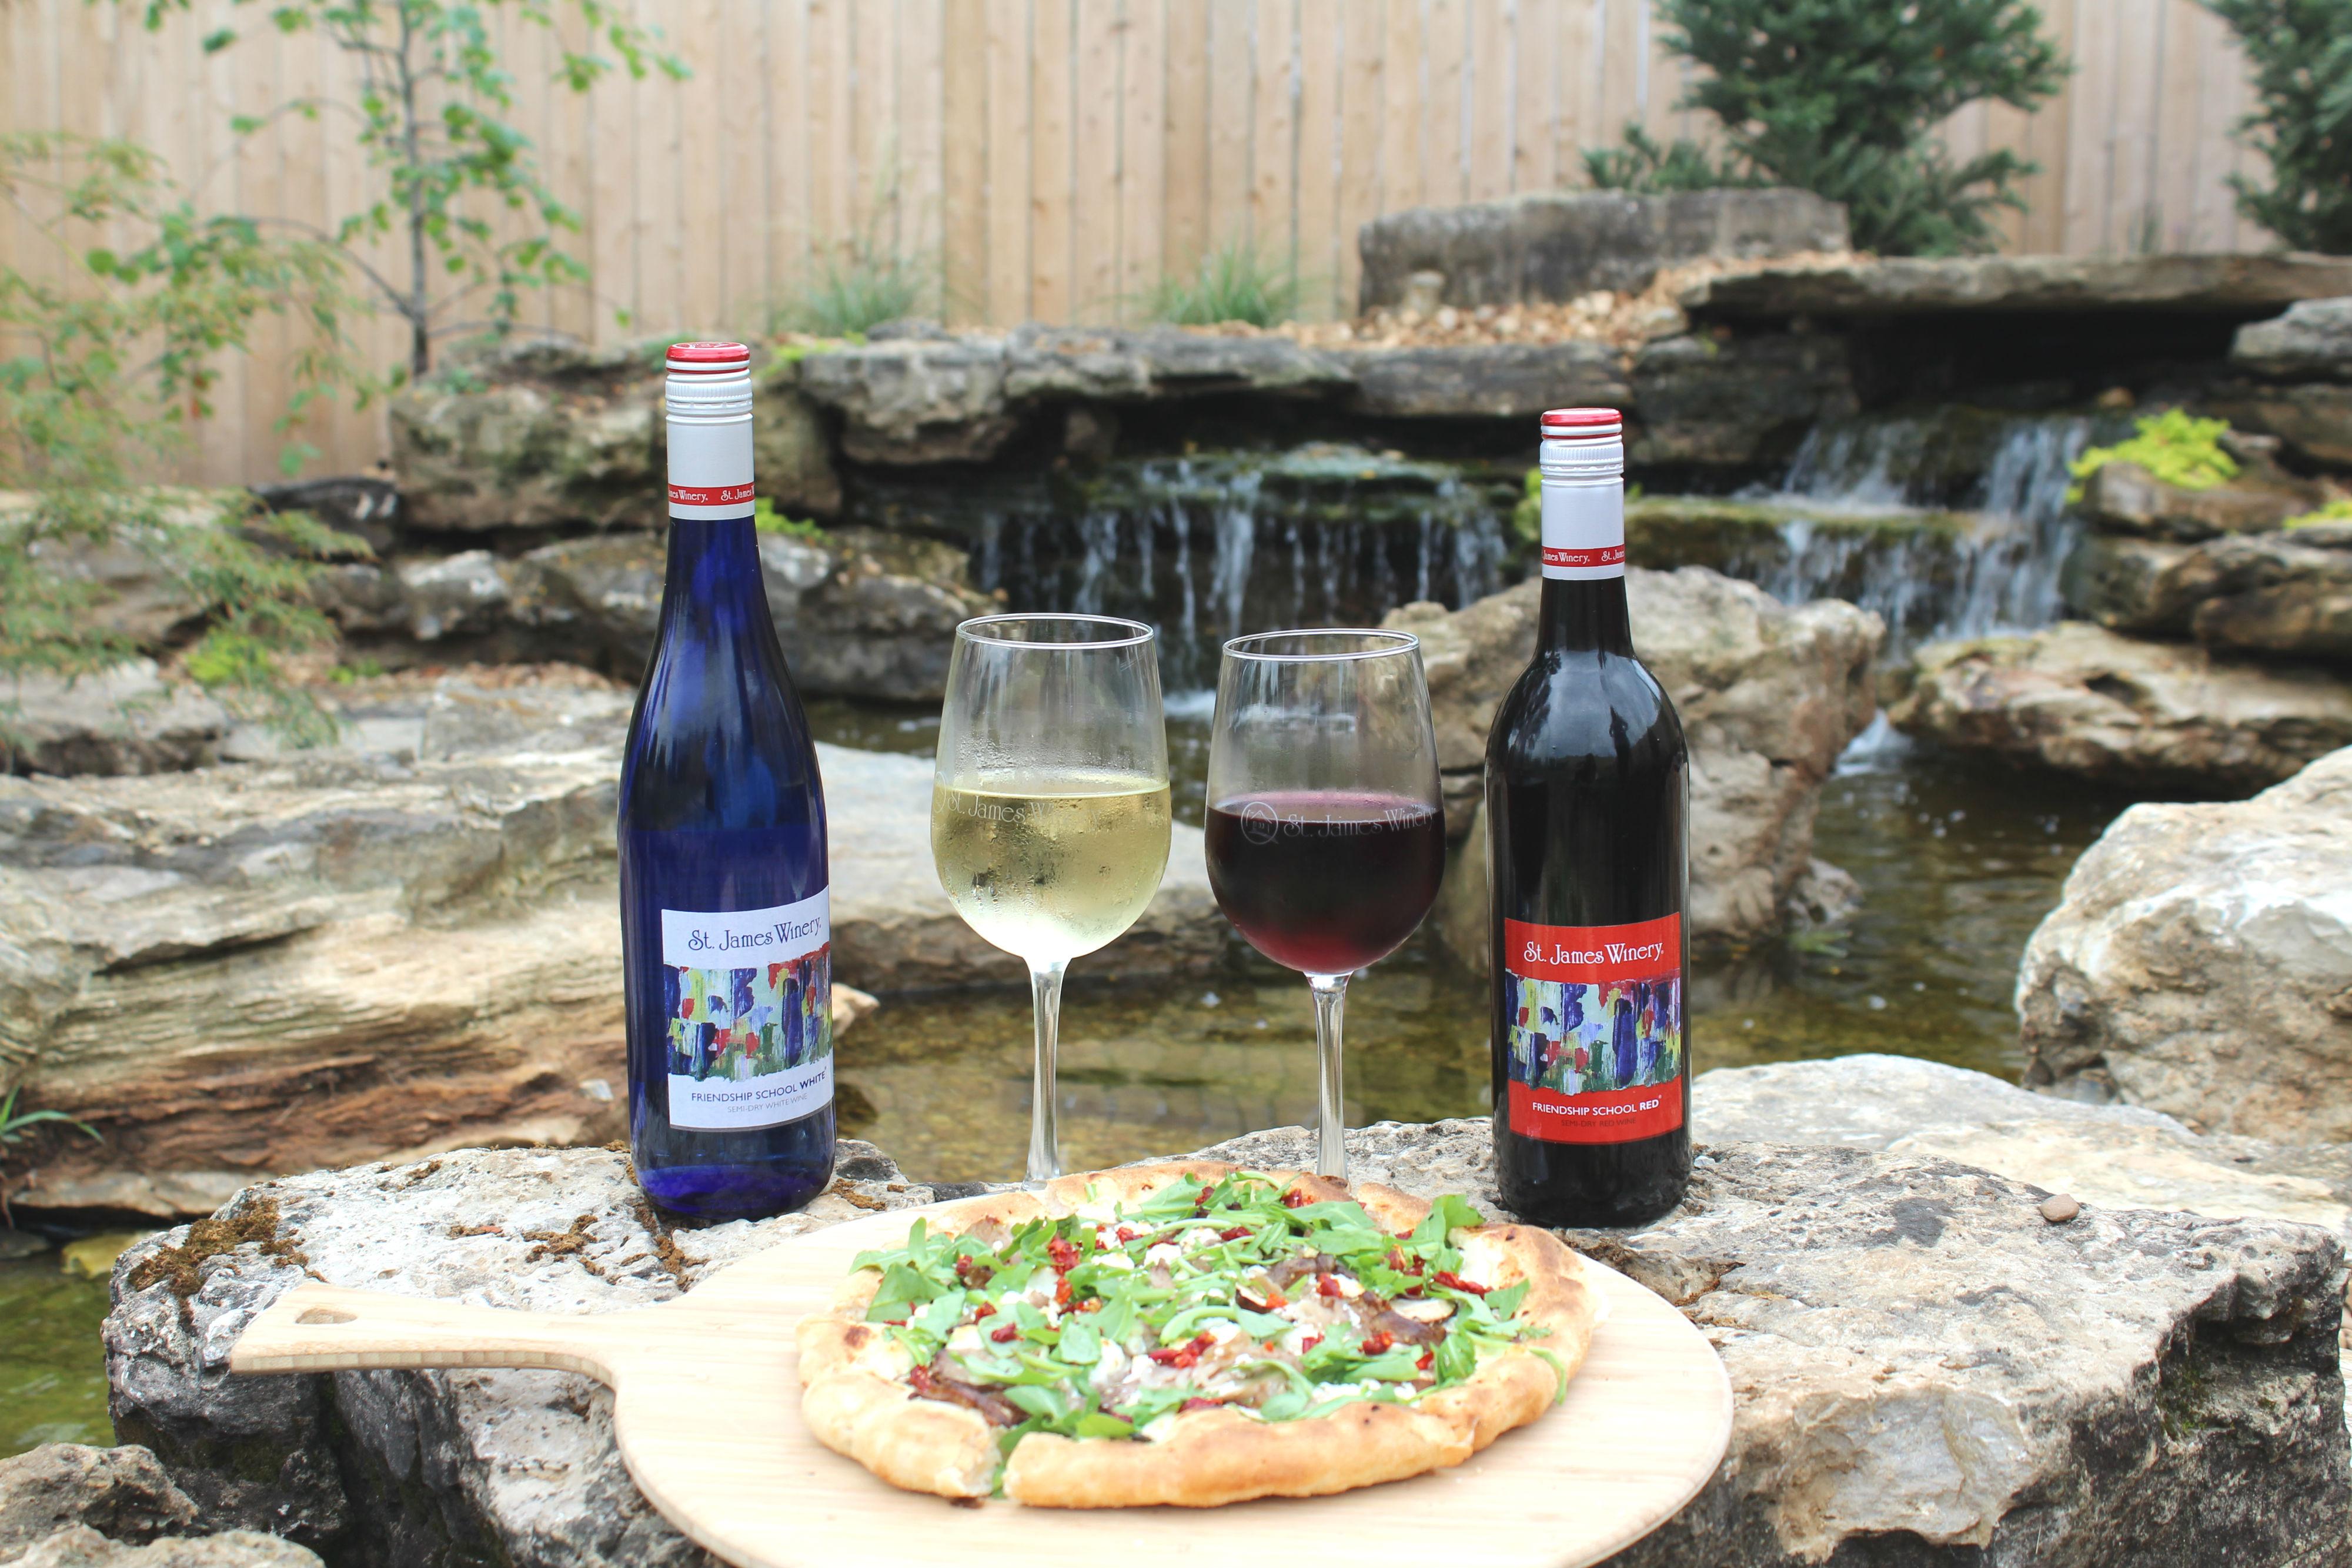 St. James Winery - Branson - outdoor photo, daytime, a plate with a pizza is on a rock with several bottles of wine in front of a small waterfall.